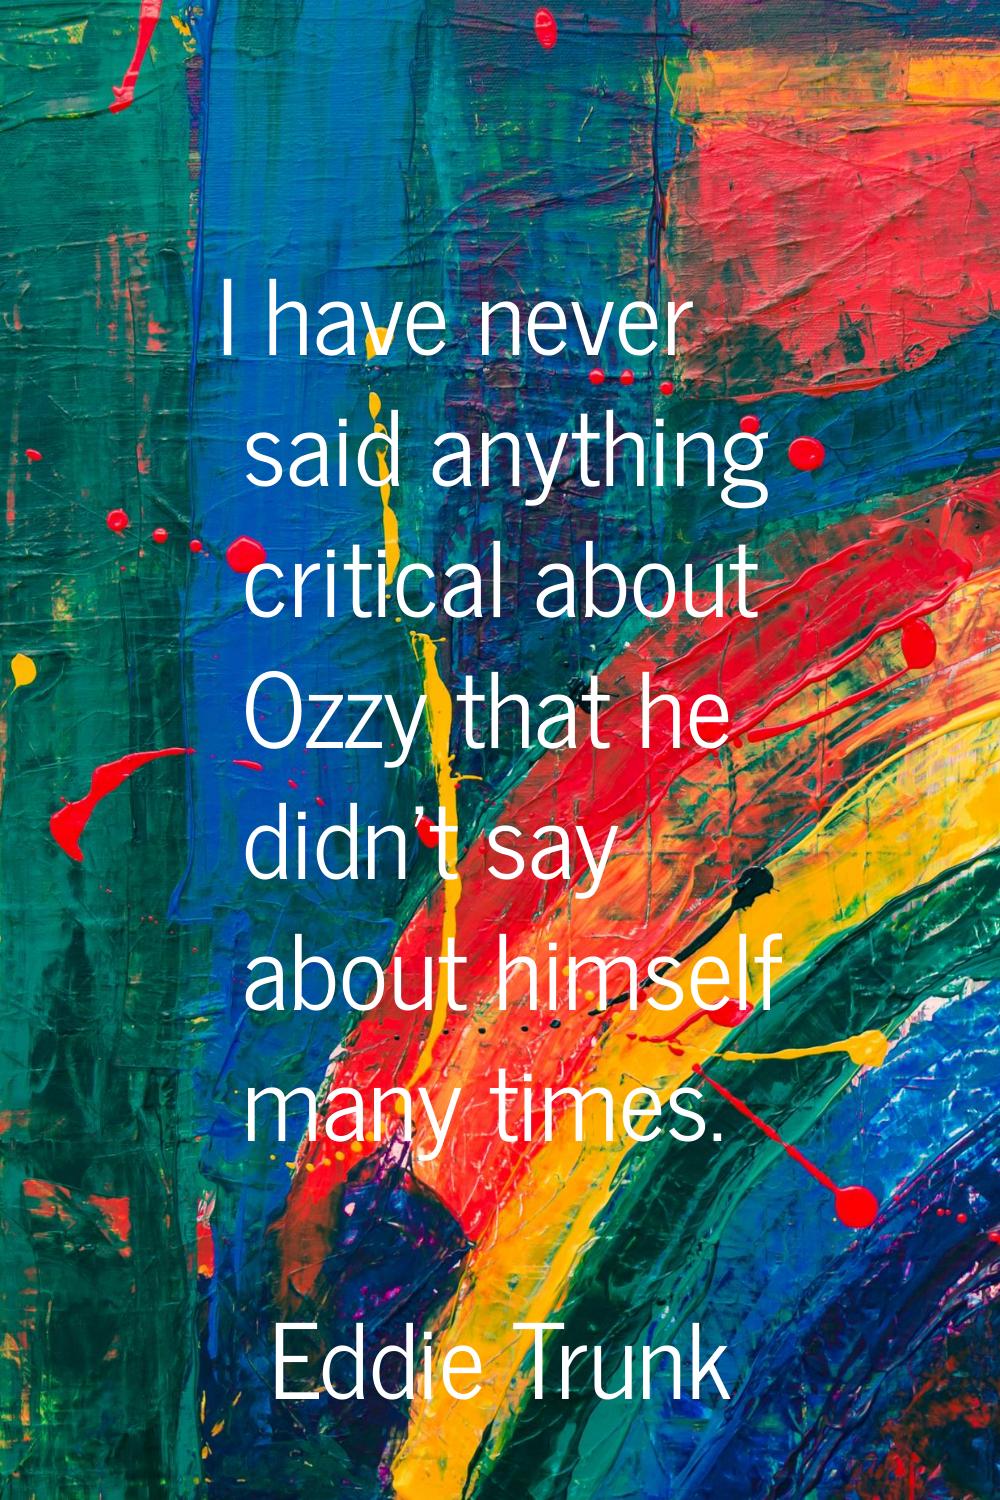 I have never said anything critical about Ozzy that he didn't say about himself many times.